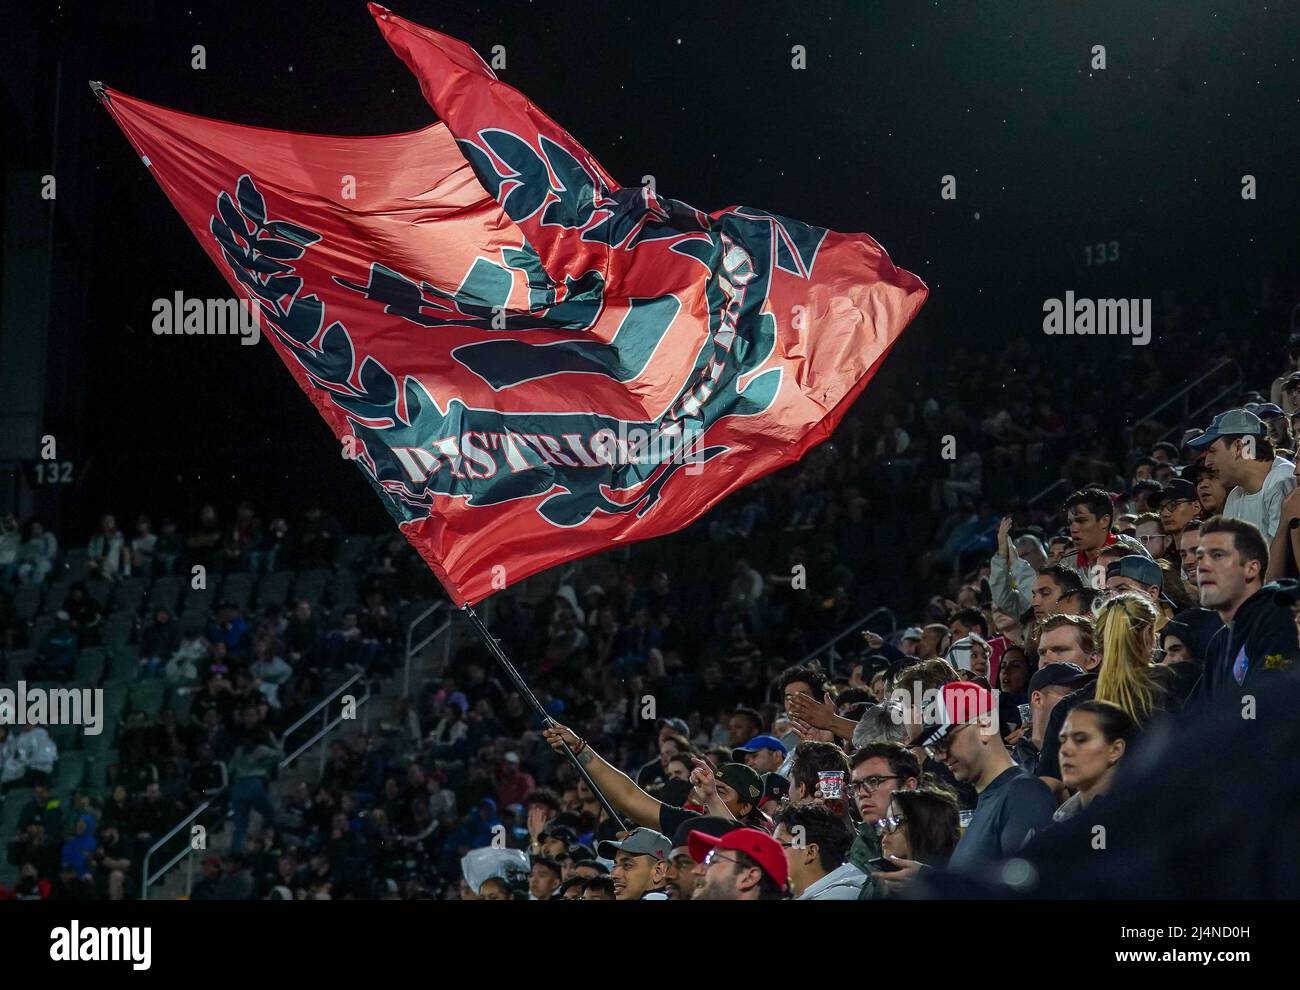 WASHINGTON, DC, USA - 16 APRIL 2022: Banner in the fan section during a MLS match between D.C United and Austin FC, on April 16, 2022, at Audi Field, in Washington, DC. (Photo by Tony Quinn-Alamy Live News) Stock Photo